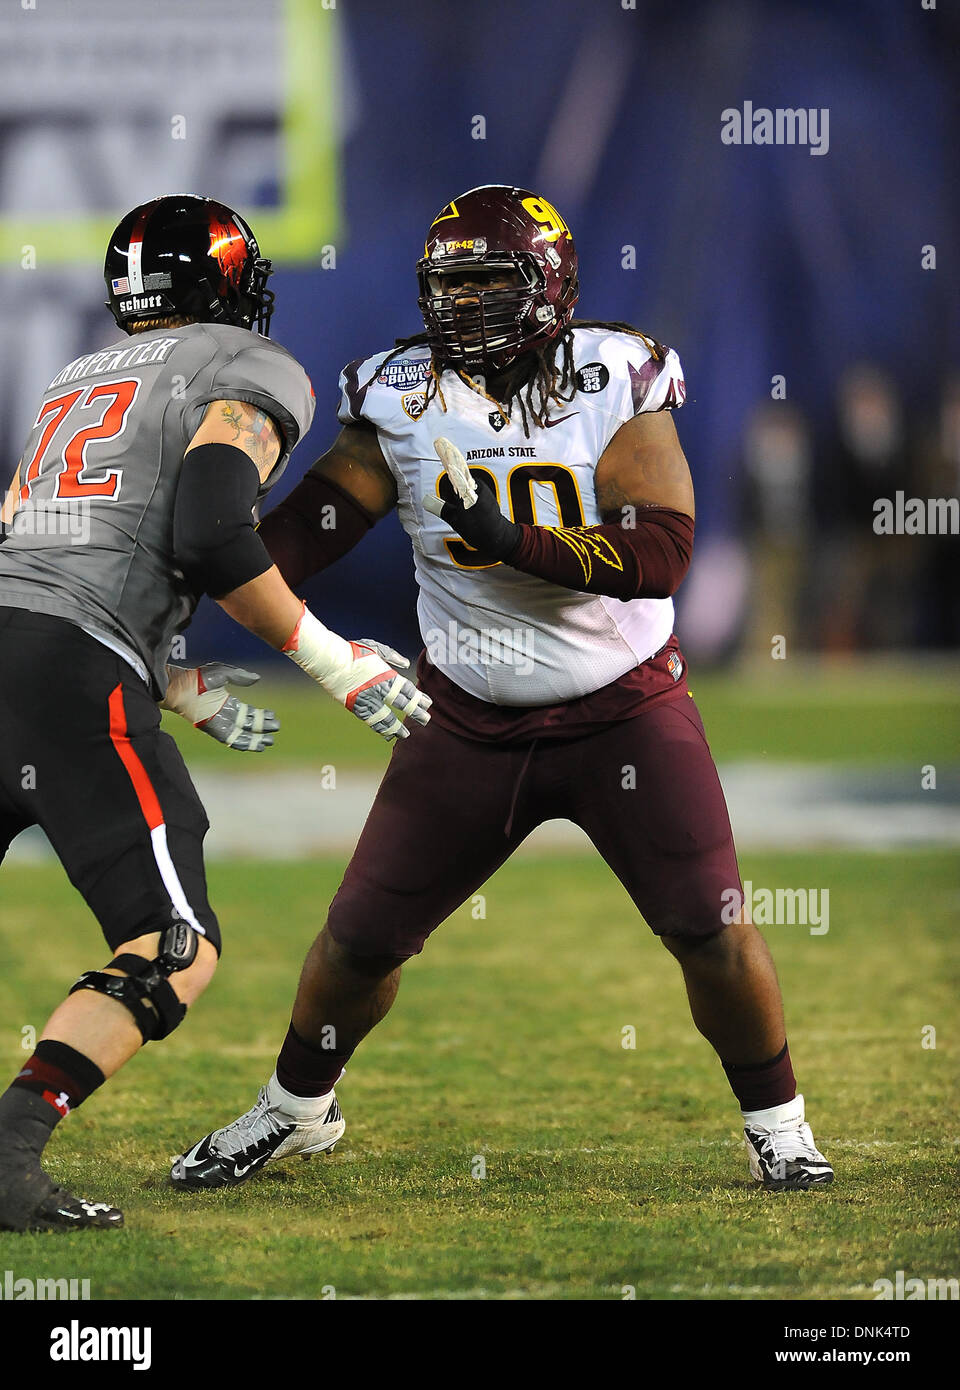 San Diego, CA, USA. 30th Dec, 2013. December 30, 2013 San Diego, CA.Arizona State Sun Devils defensive tackle (90) Will Sutton in action, against an aggressive Red Raiders offense. The The Red Raiders and Sun Devils faced off, one other time in 1999 in their programsÃ¢â¬â¢ histories. Today the Sun Devils were defeated 37-23 on Monday, December 30, 2013 in the National University Bowl in San Diego, California. (Mandatory Credit: Jose Marin / MarinMedia.org / Cal Sport Media) (Complete photographer, and credit required) Credit:  csm/Alamy Live News Stock Photo